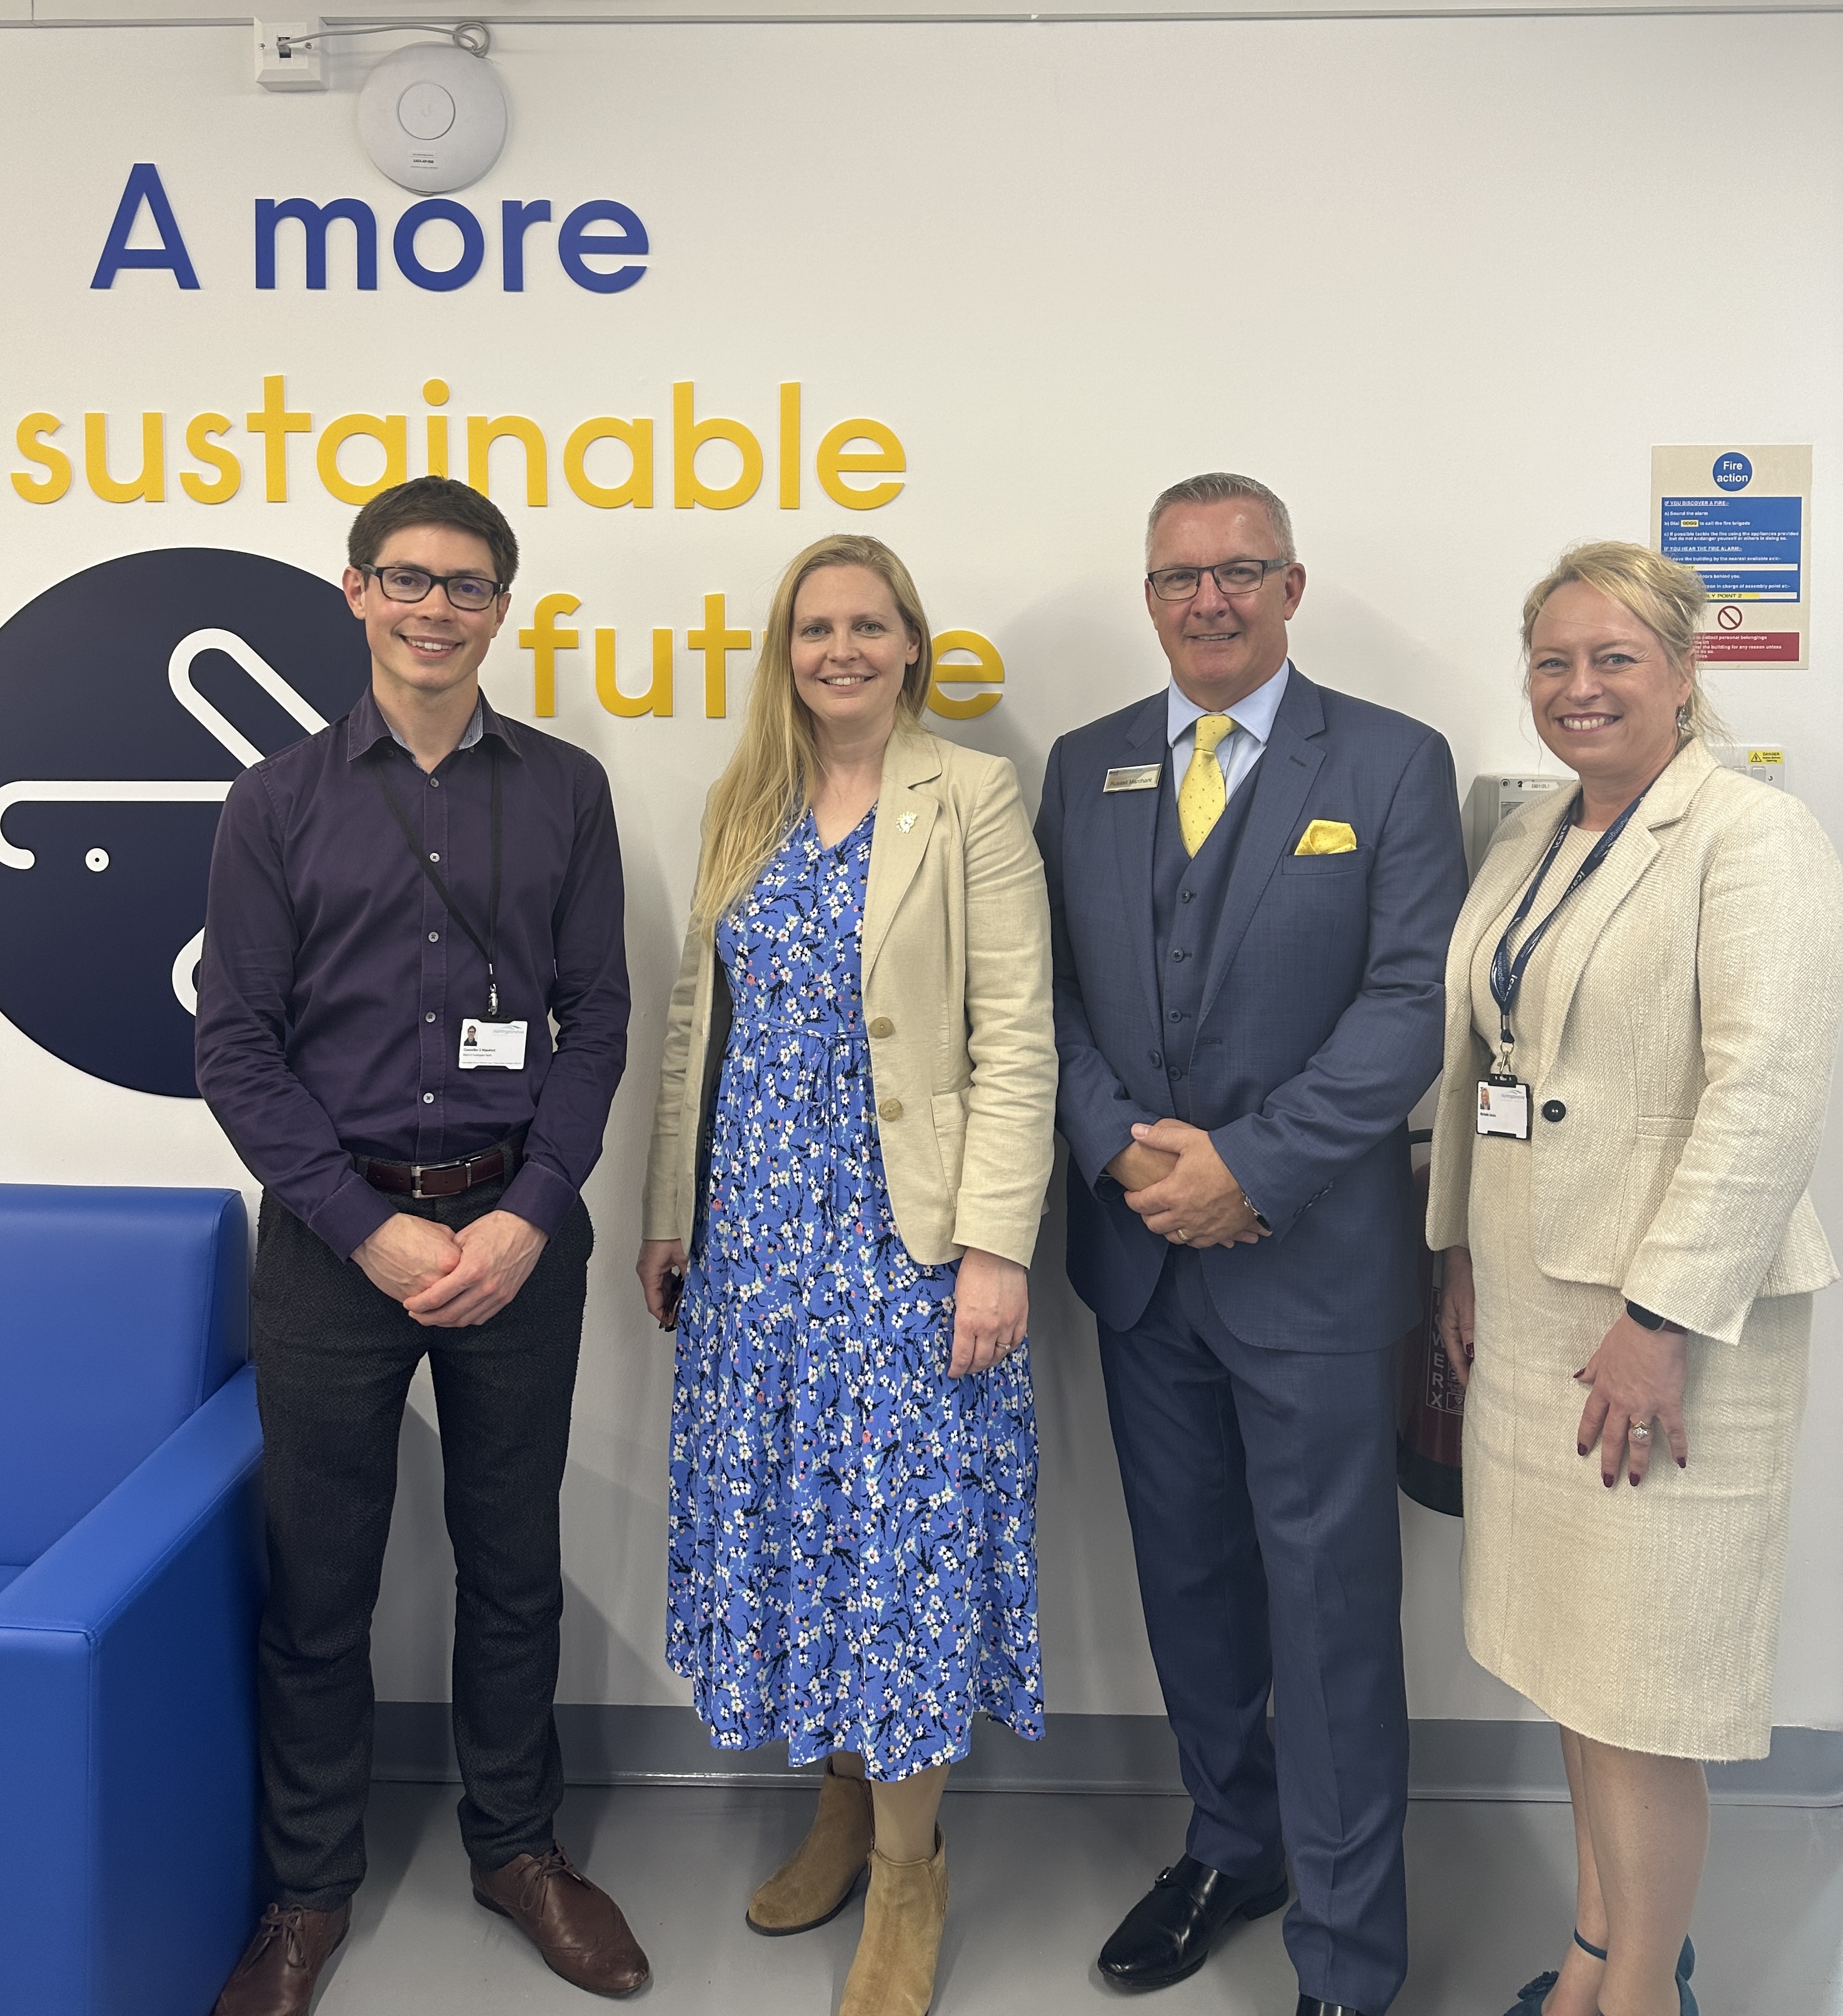 Image of Councillor Sam Wakeford, Councillor Lara Davenport Ray, Russell Marchant (Strategic Business Development Manager, Reed Environment) and Michelle Sacks (Chief Executive, Huntingdonshire District Council